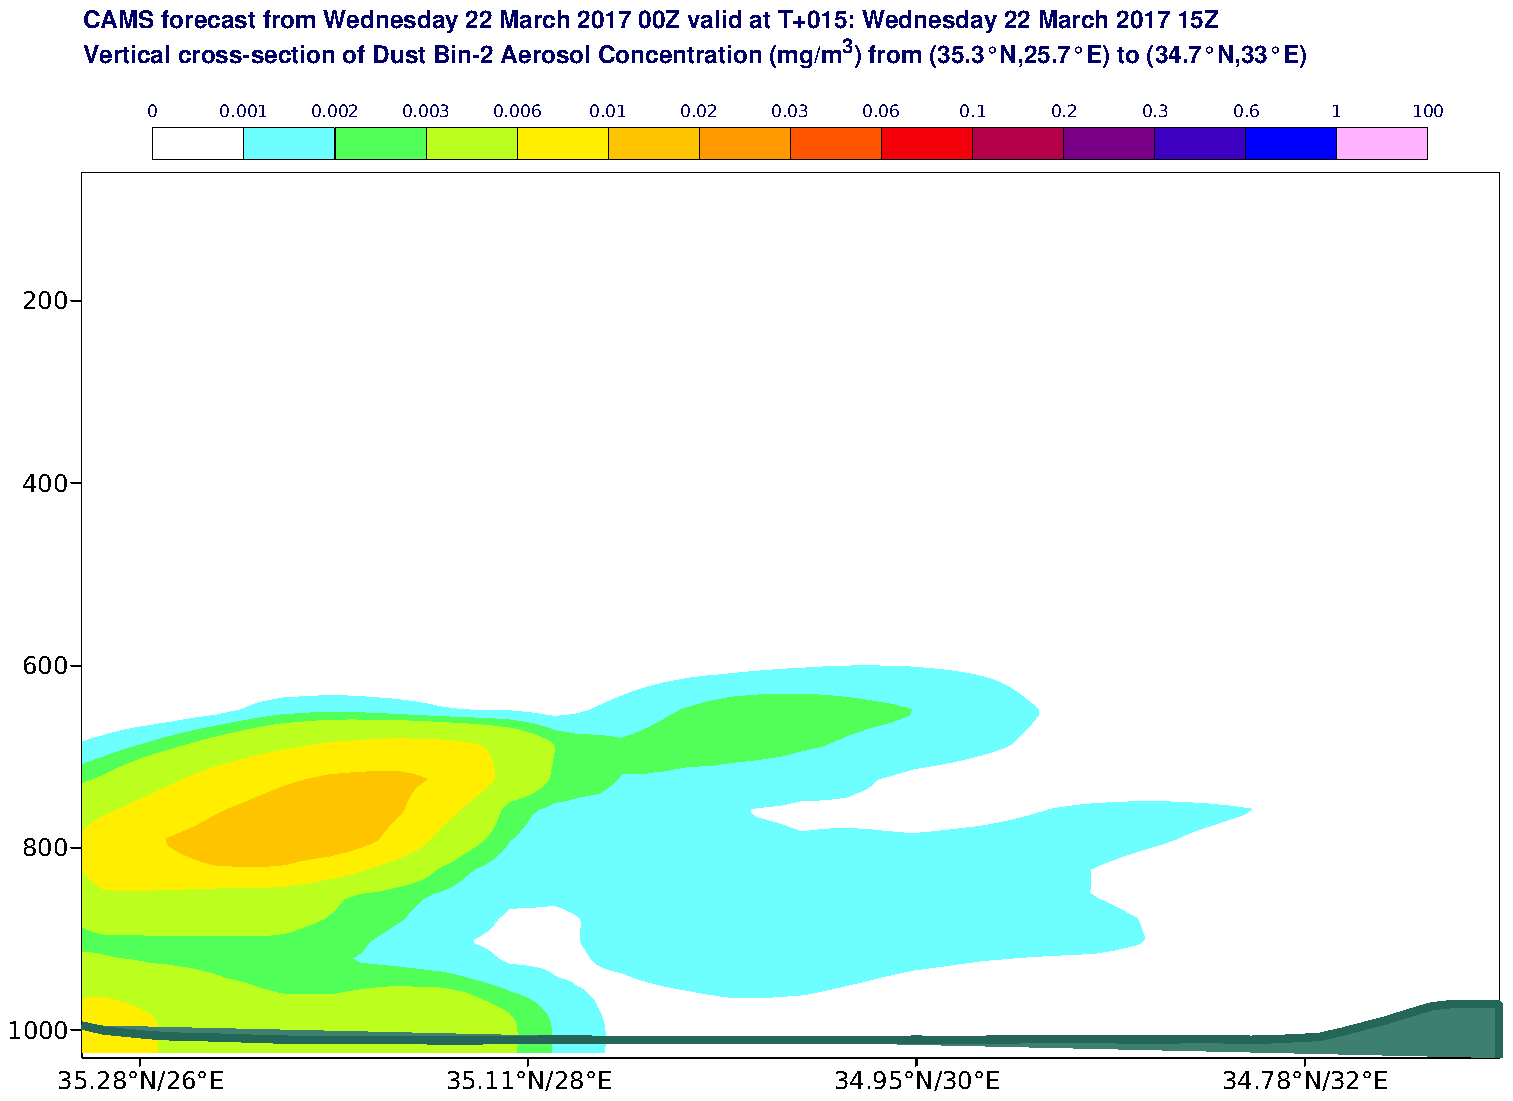 Vertical cross-section of Dust Bin-2 Aerosol Concentration (mg/m3) valid at T15 - 2017-03-22 15:00